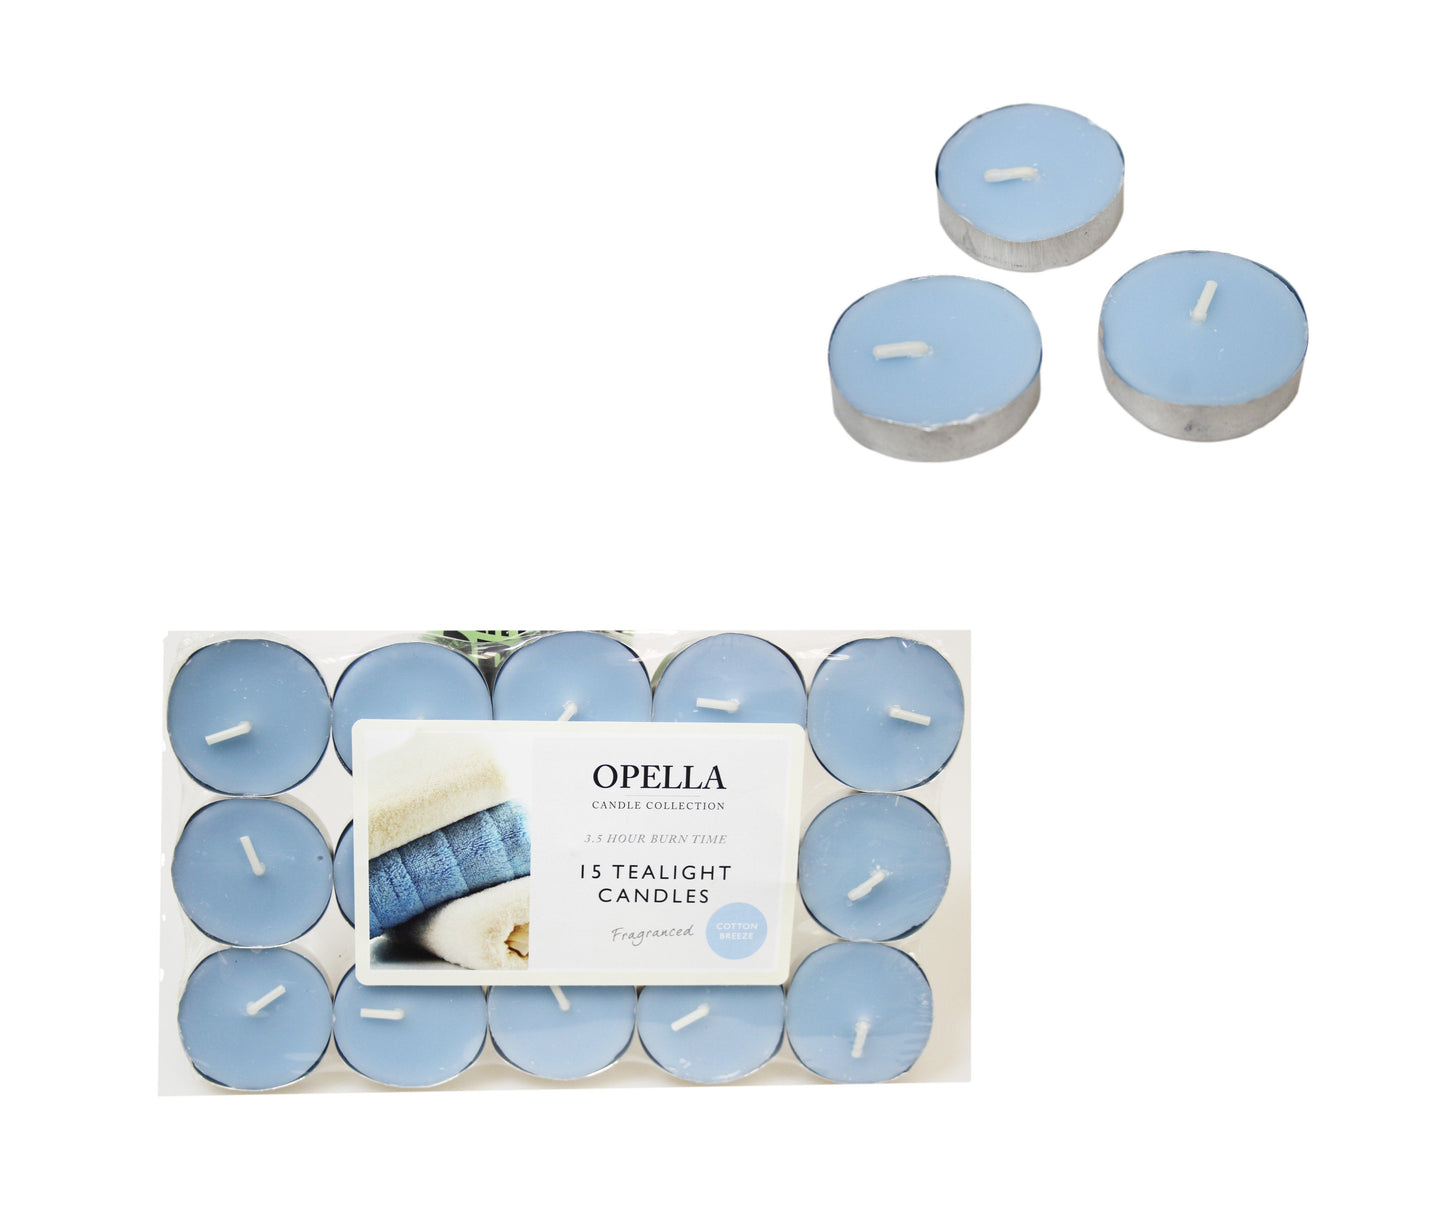 Beautifully Scented Opella Cotton Breeze 12 Tealight Candles 3.5 Hour Burn Time CD001C (Parcel Rate)